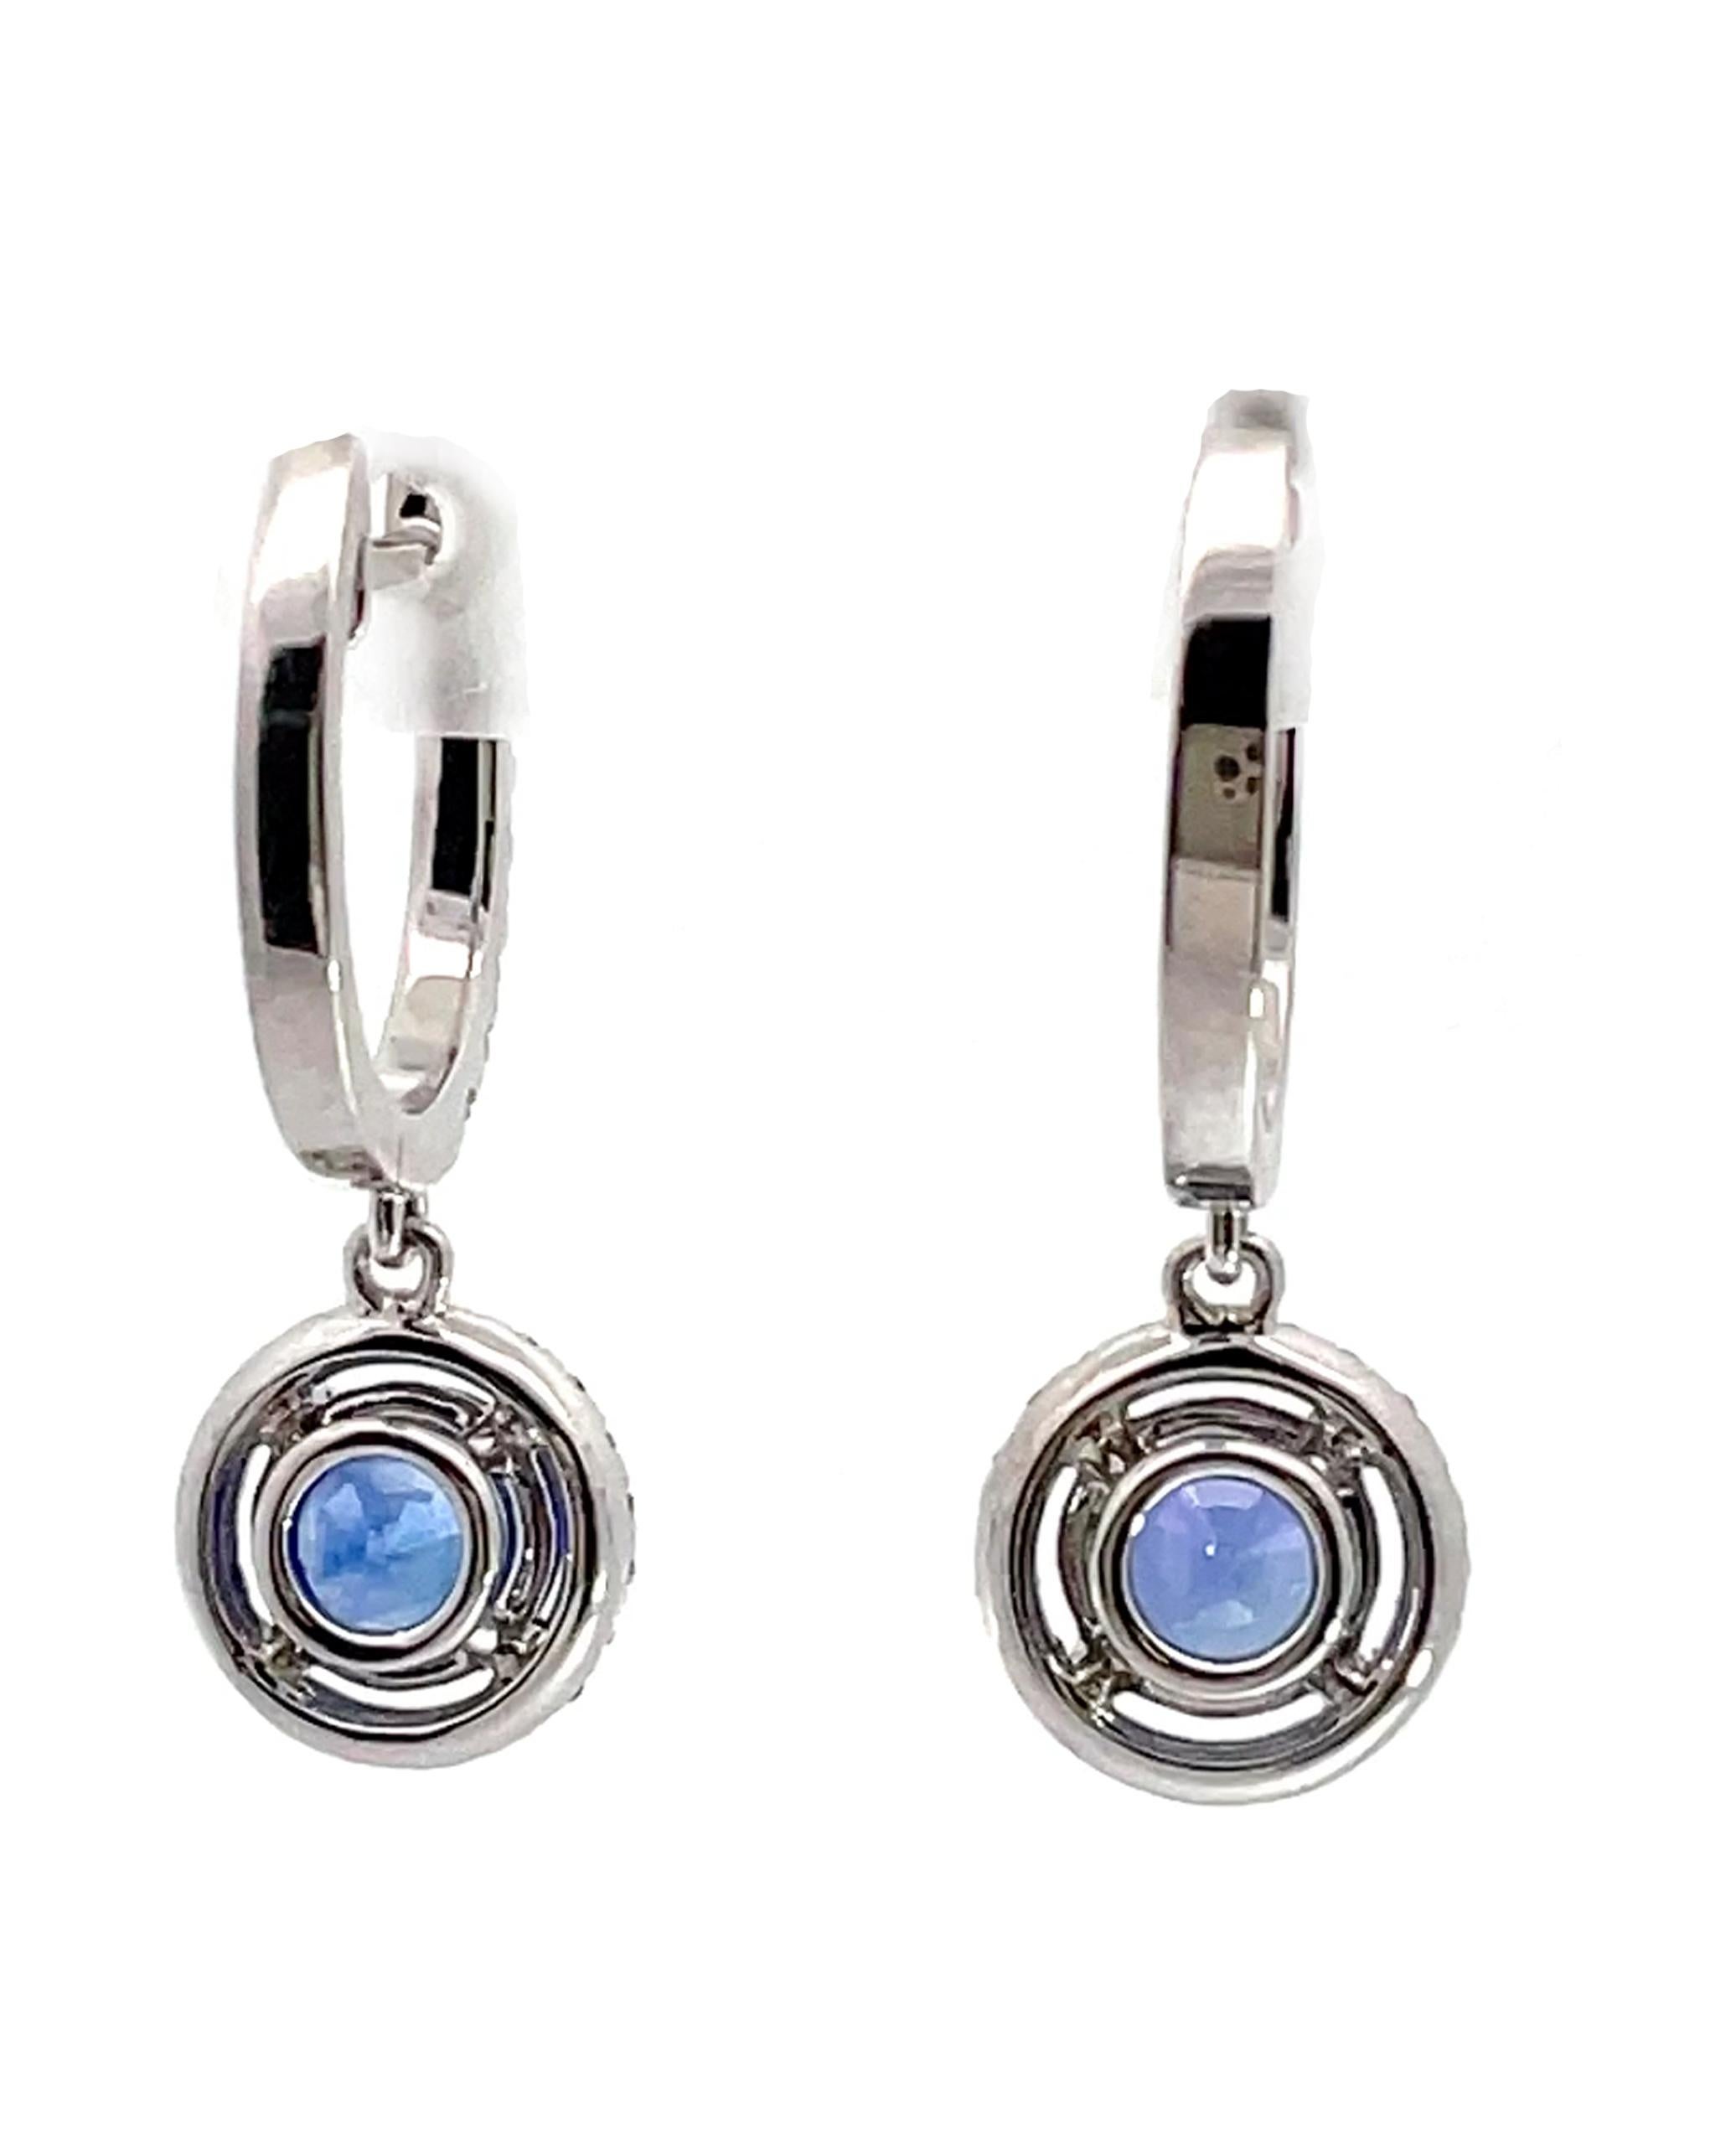 18K white gold drop earrings with 64 round brilliant-cut diamonds weighing 0.53 carats total weight and 2 round faceted blue sapphires weighing 2.07 carats total.

* Diamonds are G/H color, SI1 clarity.